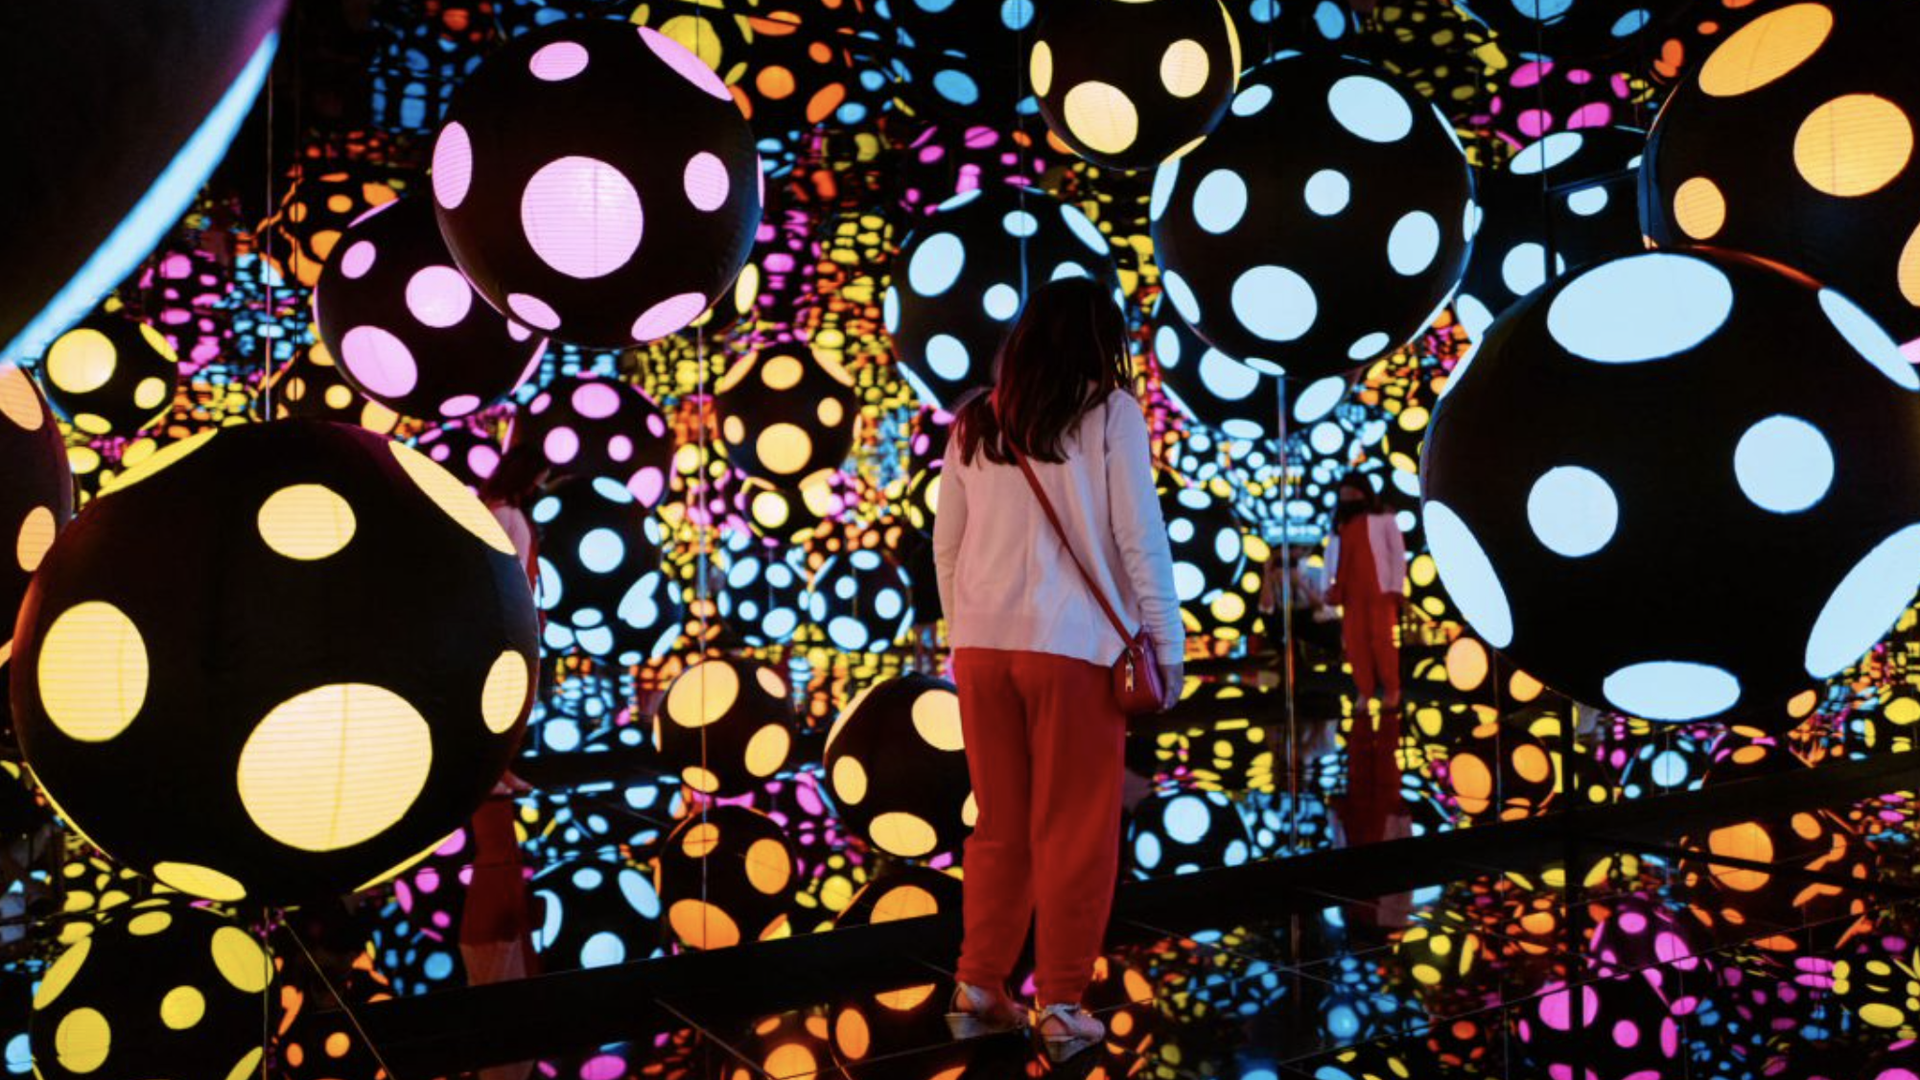 A visitor enjoy's one of the Kusama exhibition infinity mirror rooms.